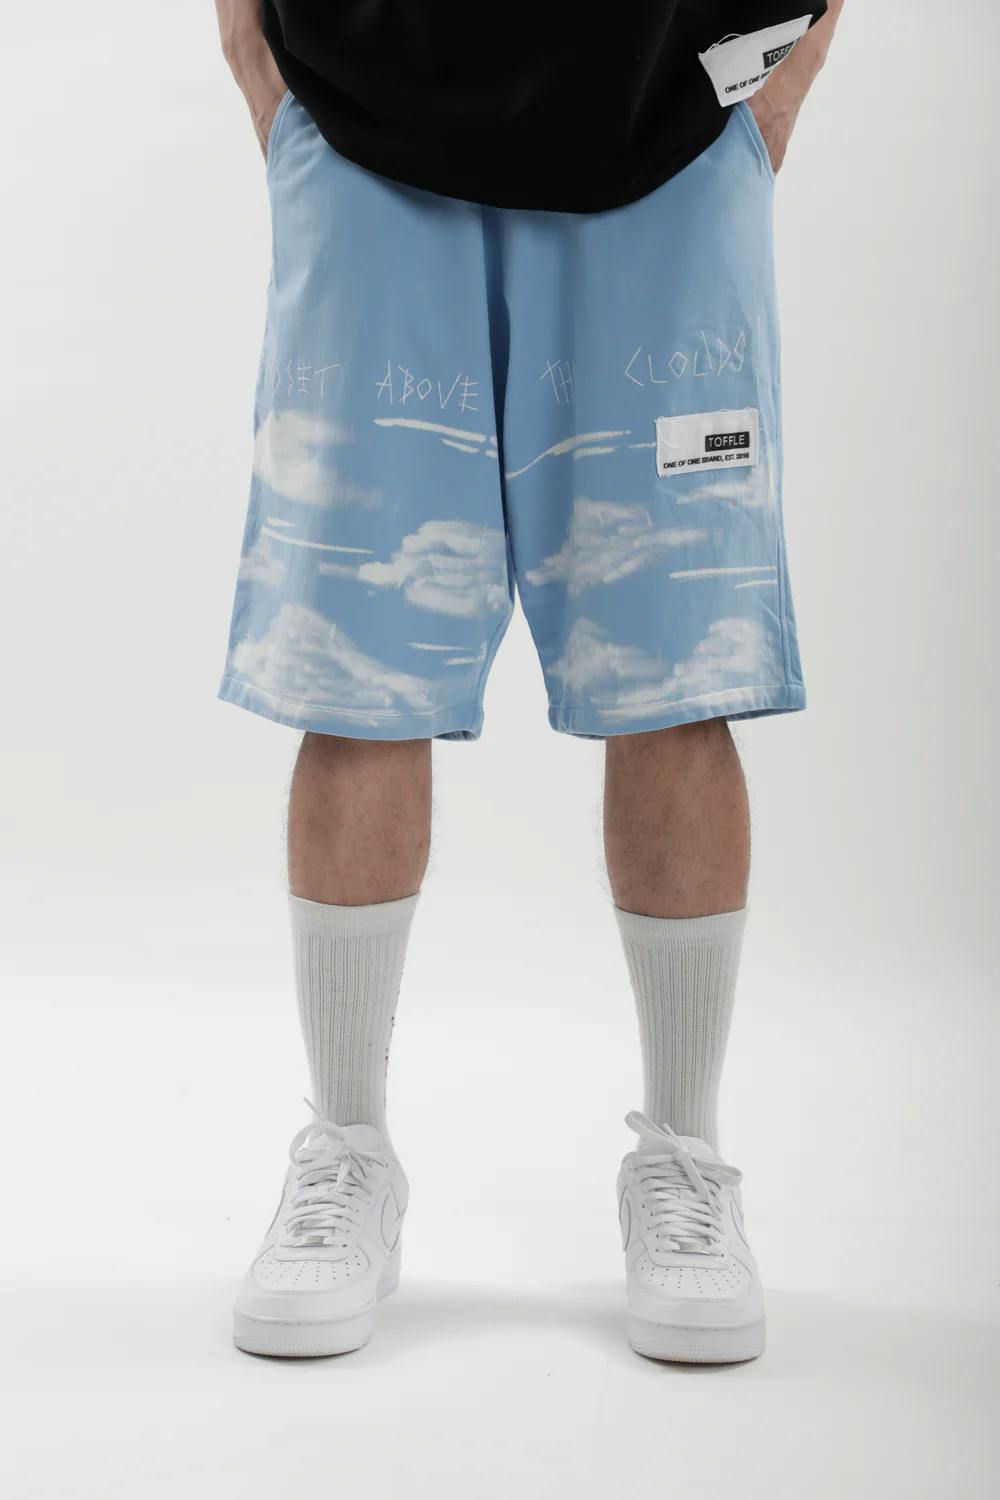 Mindset Shorts, a product by TOFFLE